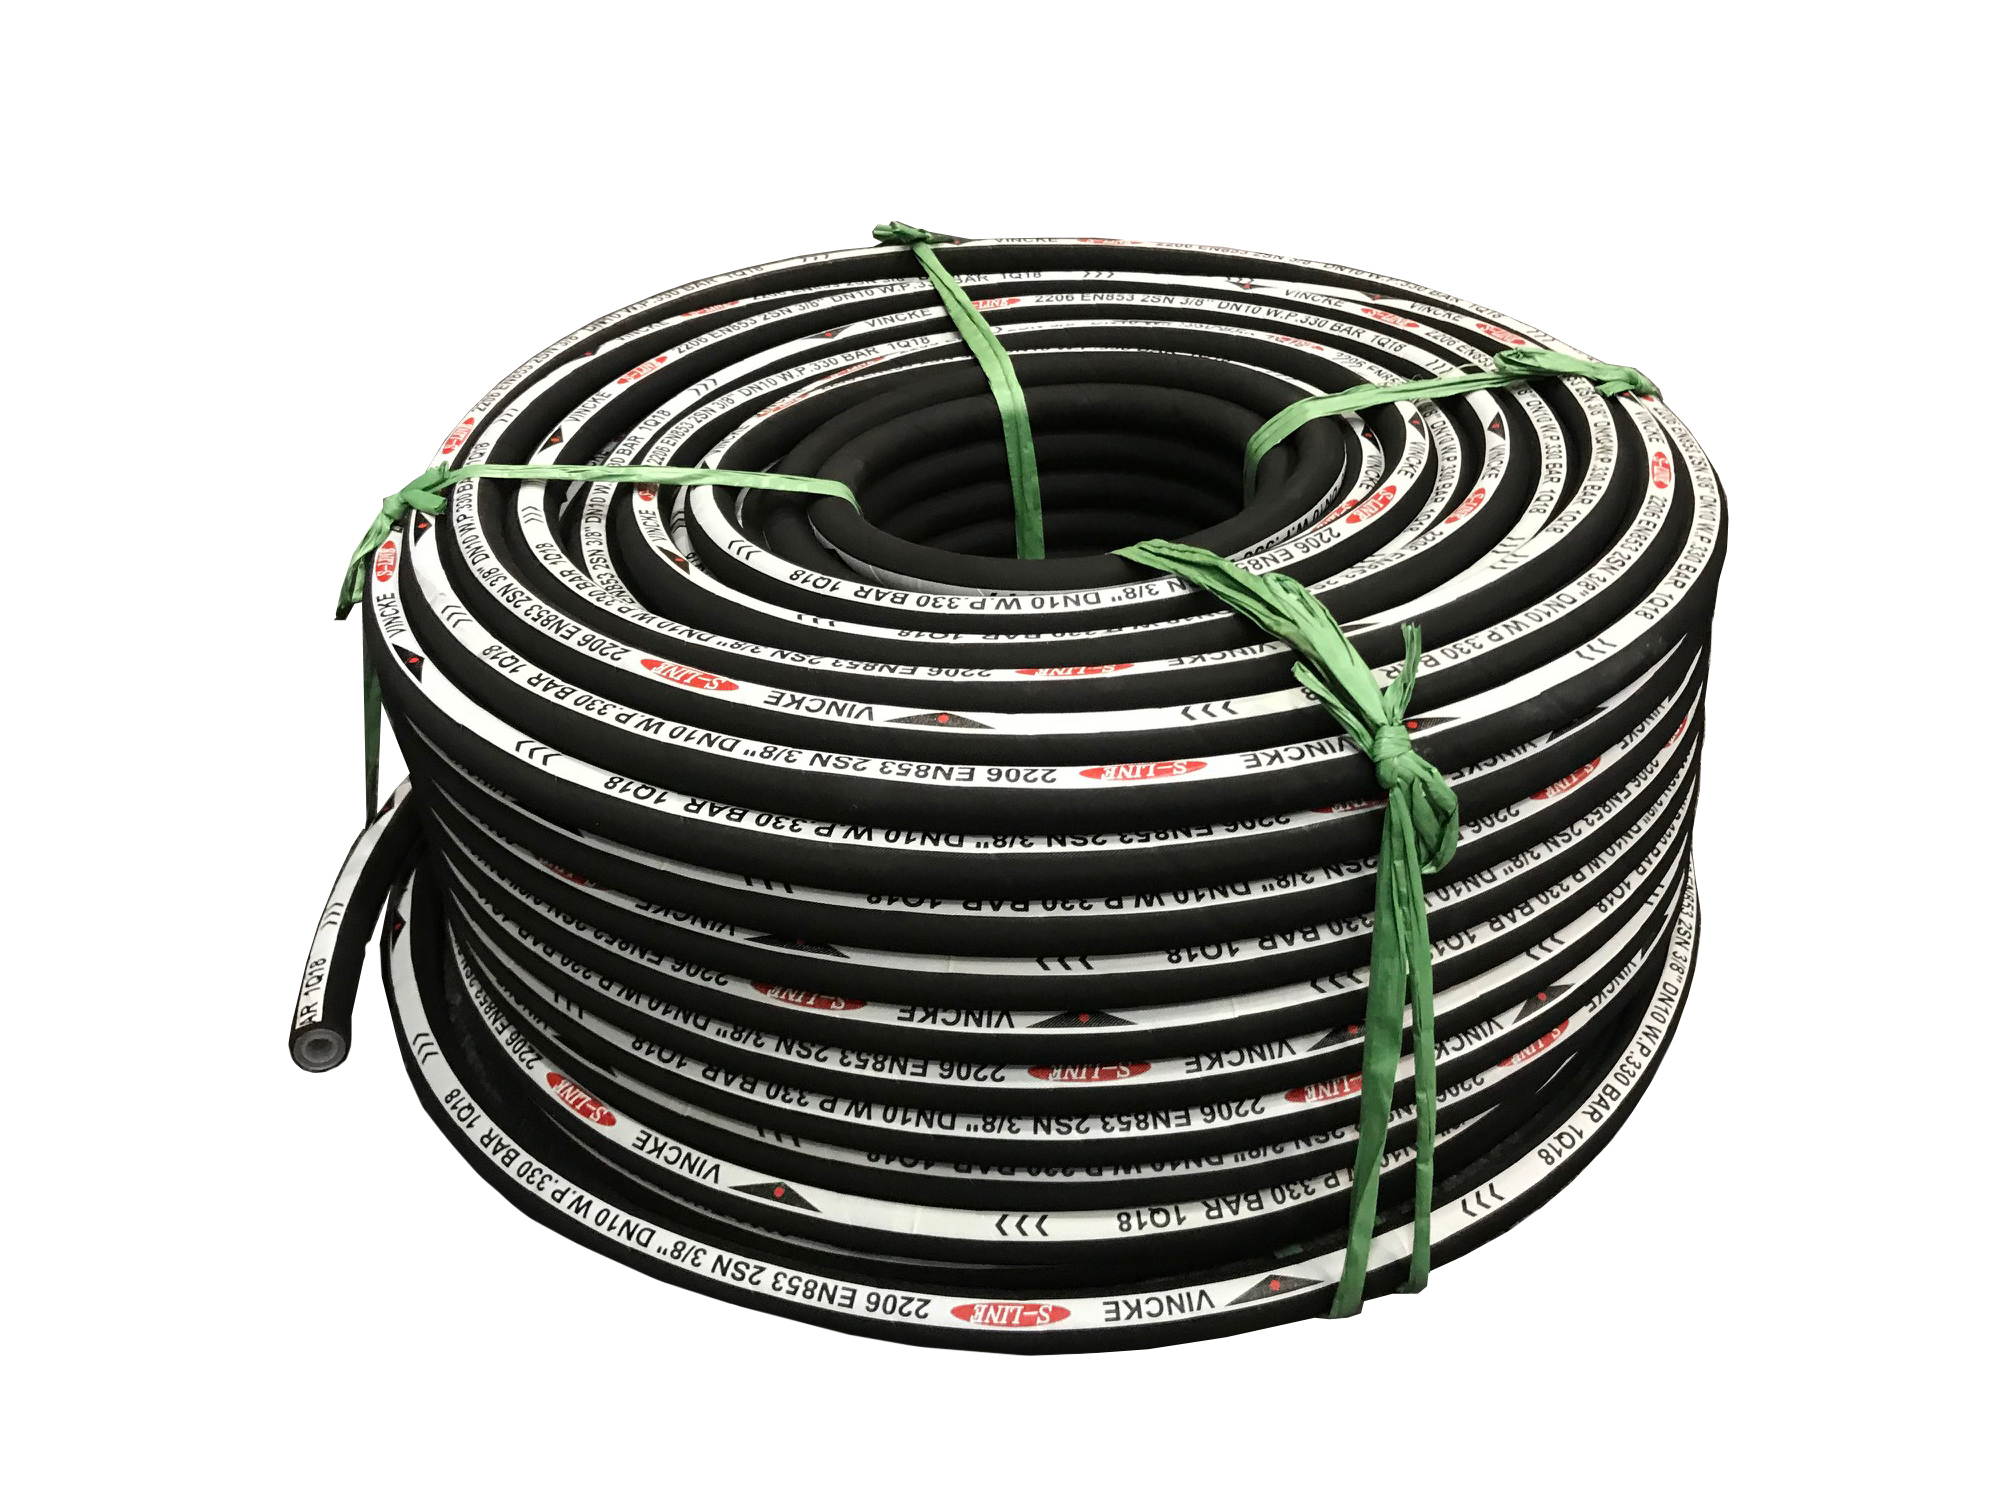 Reel of Vincke 2 Wire 100R2AT STANDARD Hydraulic Hose, 1/4" Bore, 10 Metre Coil